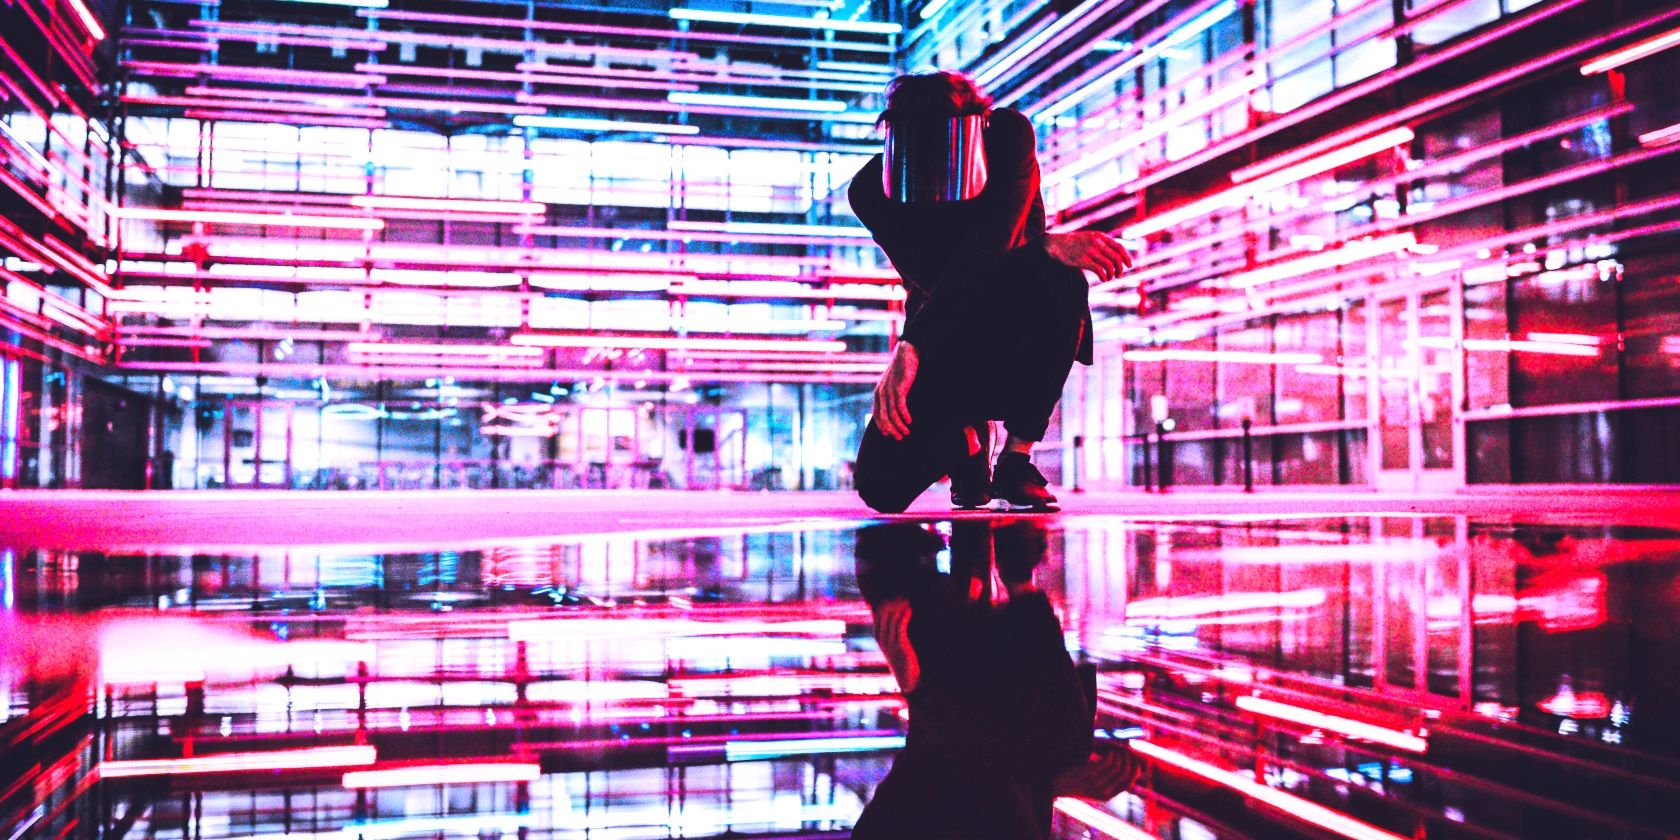 kneeling down in a futuristic environment